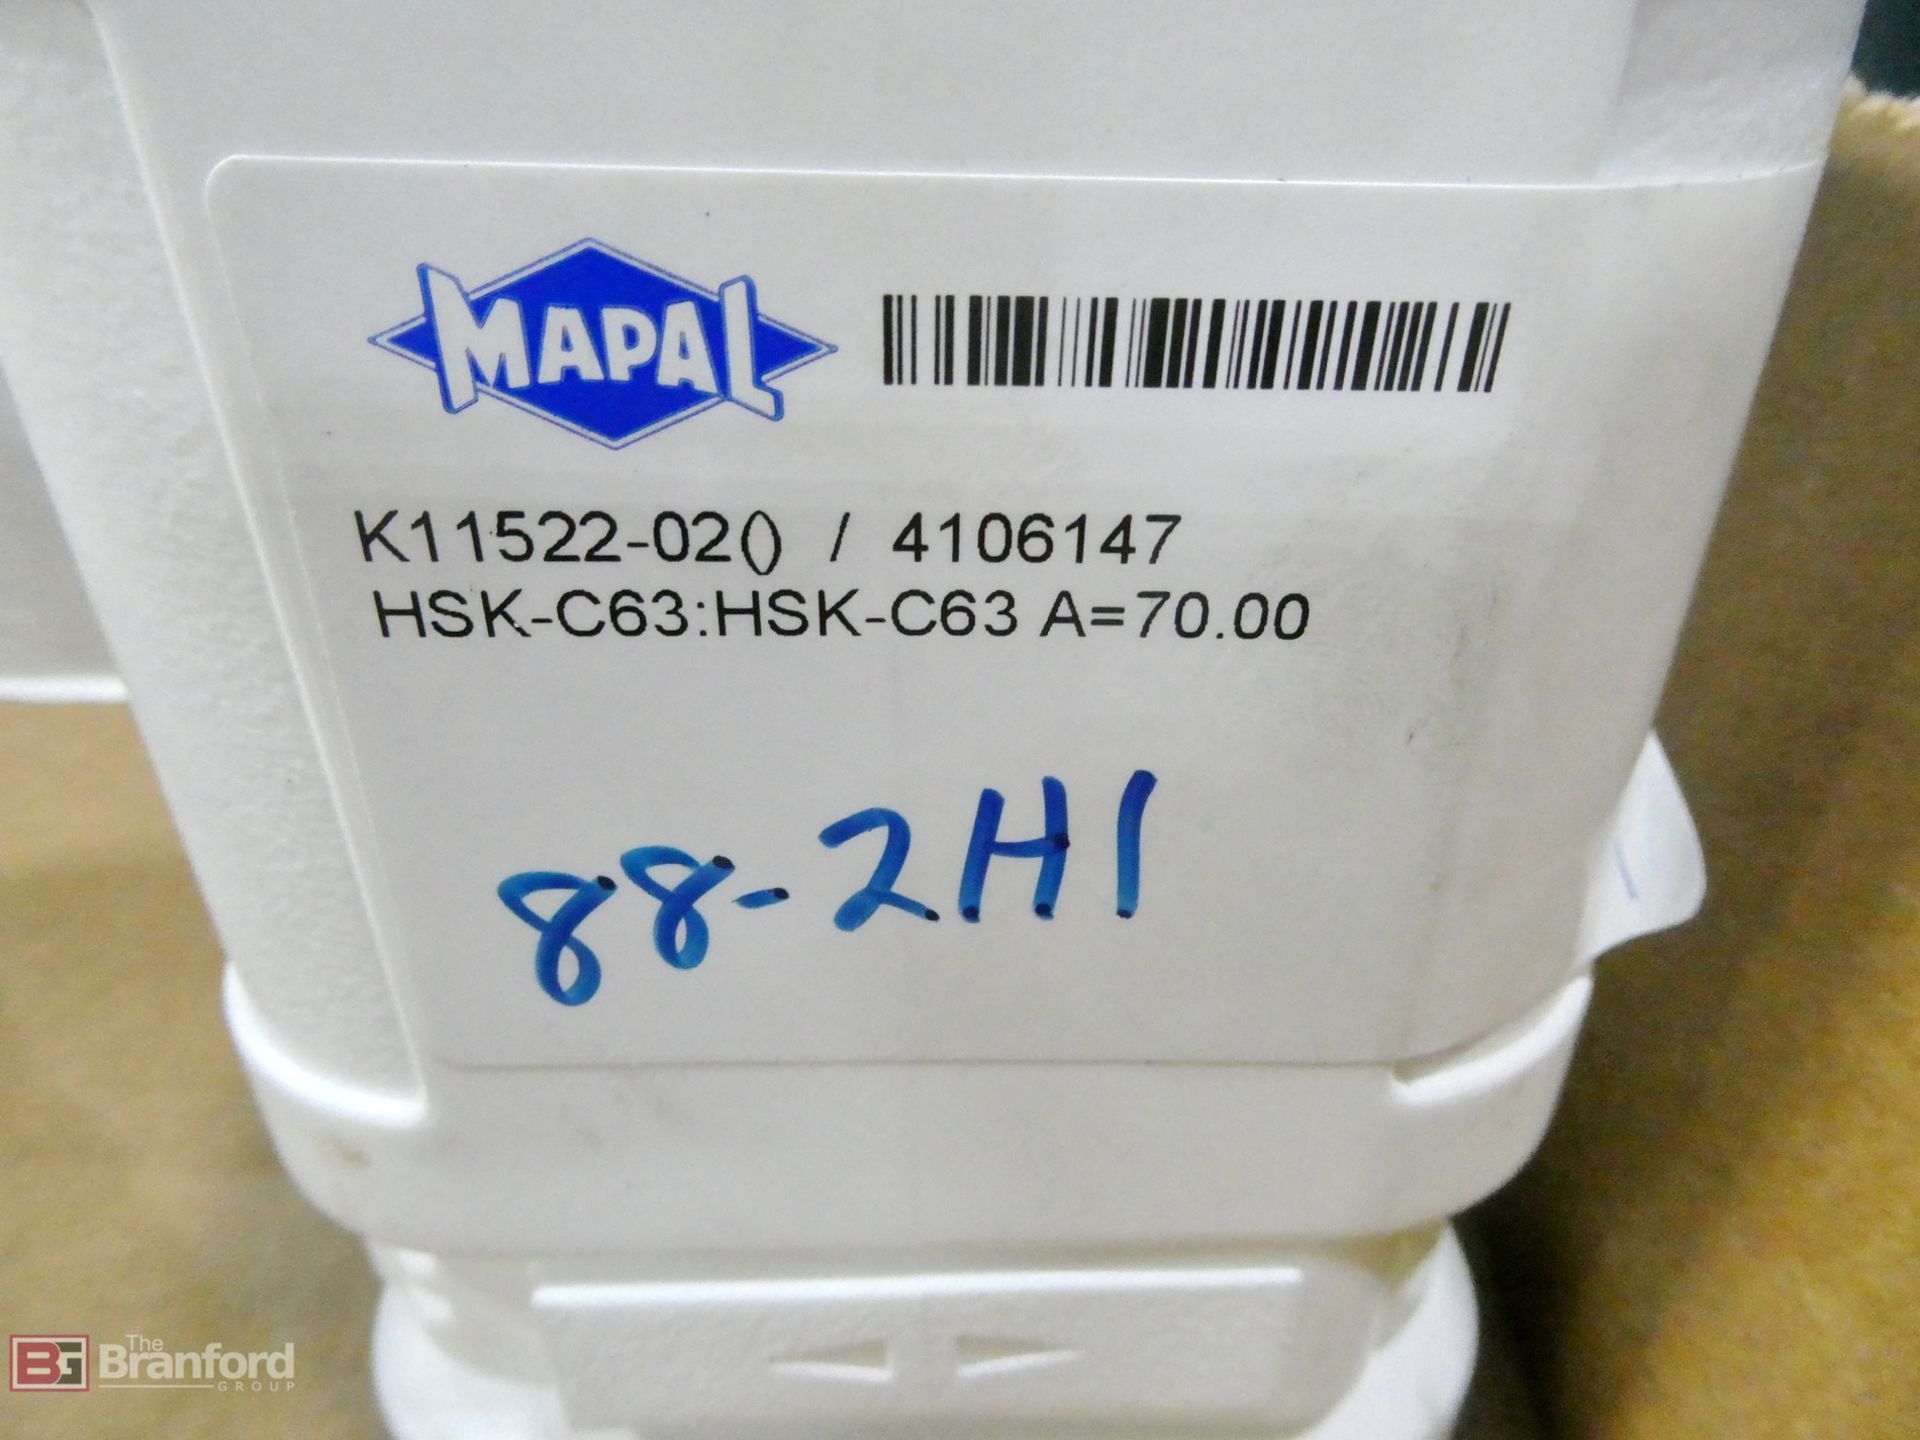 (3) Mapal K11522-02, HSKC63:HSKC63A Clamping Cartridges - Image 2 of 3